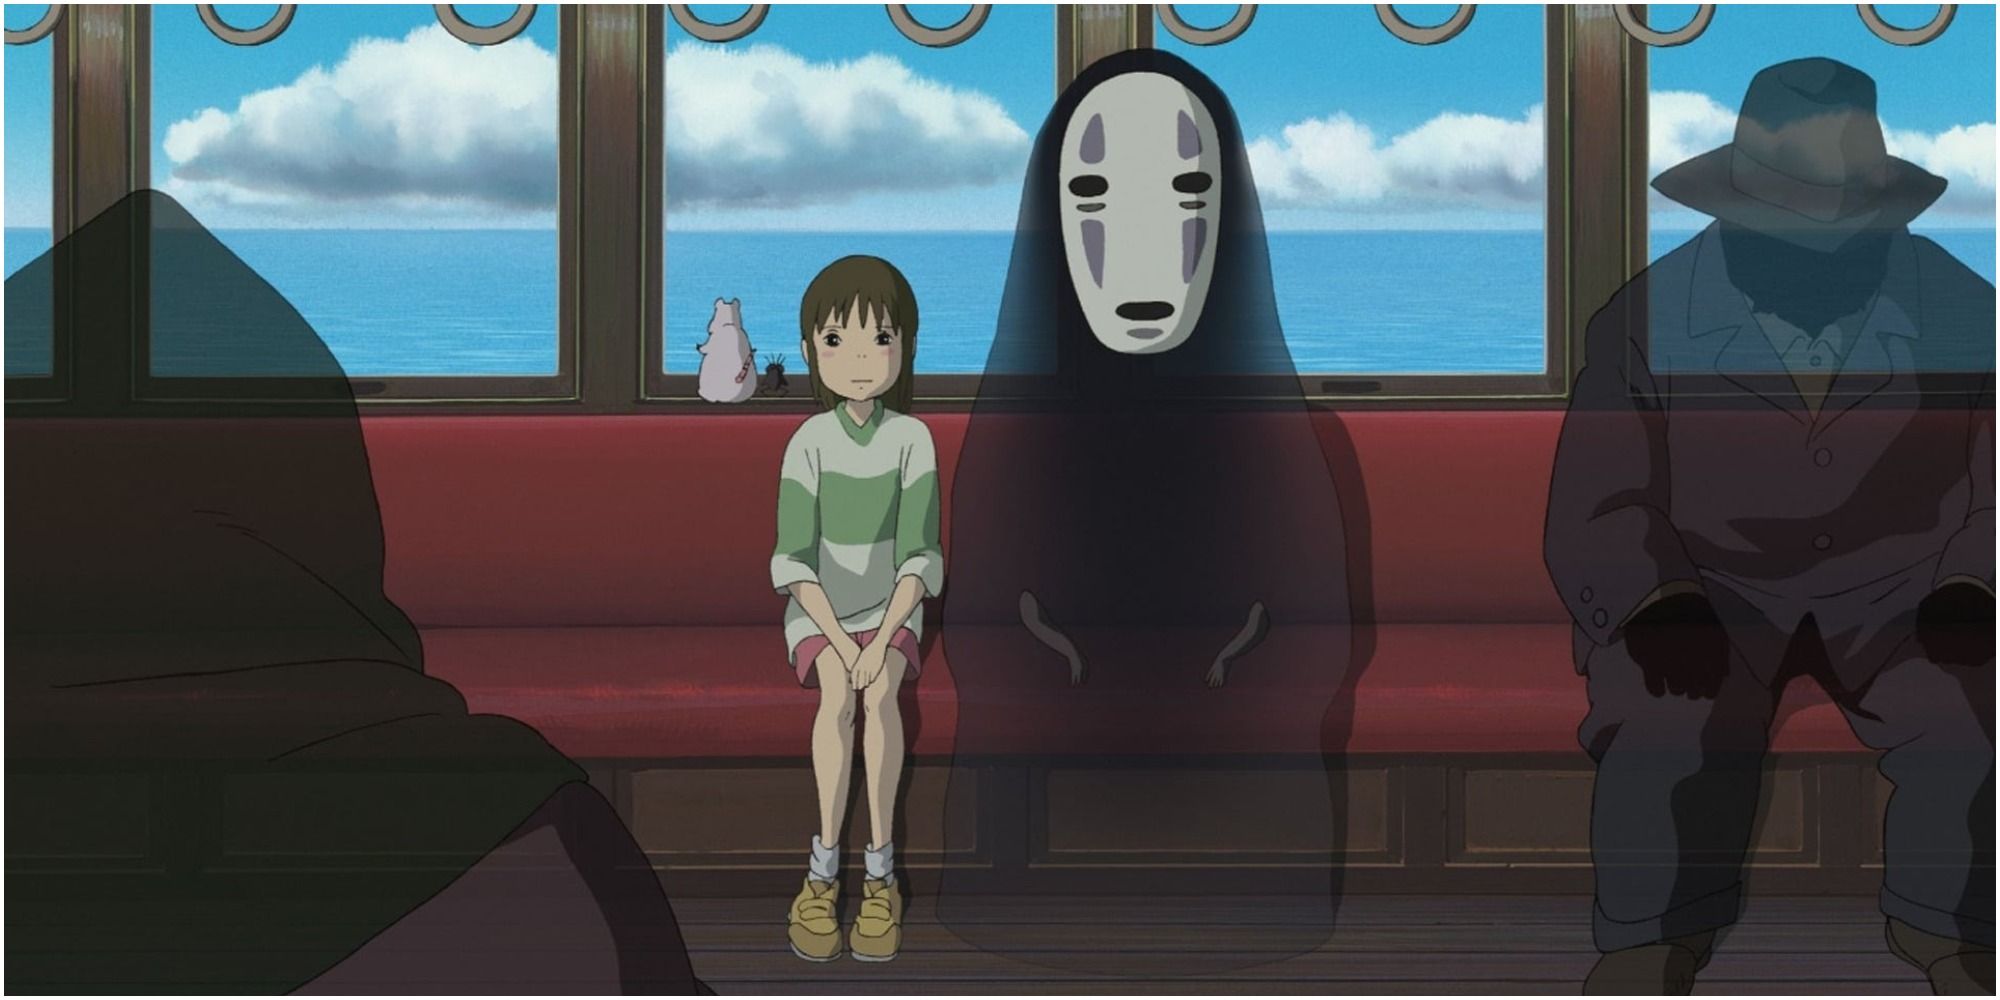 A girl rides a train inhabited by ghosts from Spirited Away 